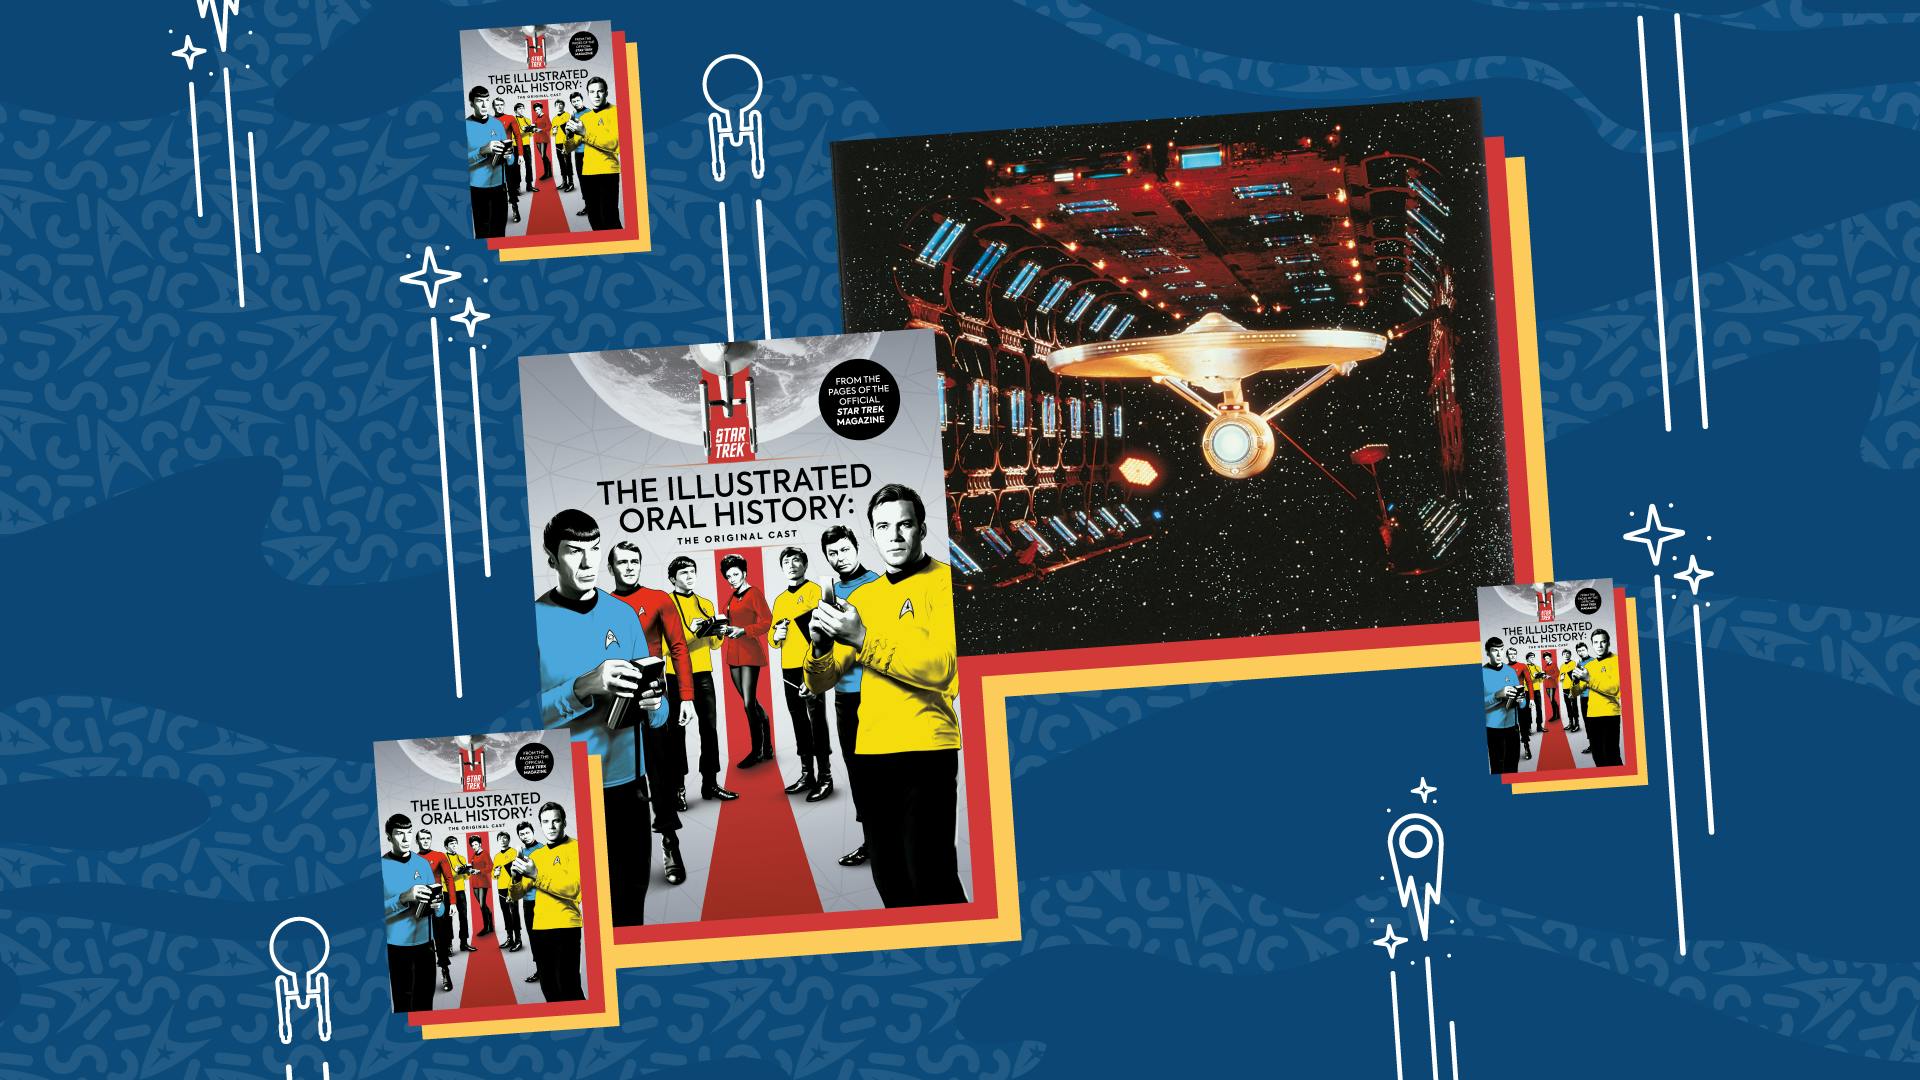 'Star Trek: The Illustrated Oral History: The Original Cast' cover along with two movie still from The Motion Picture